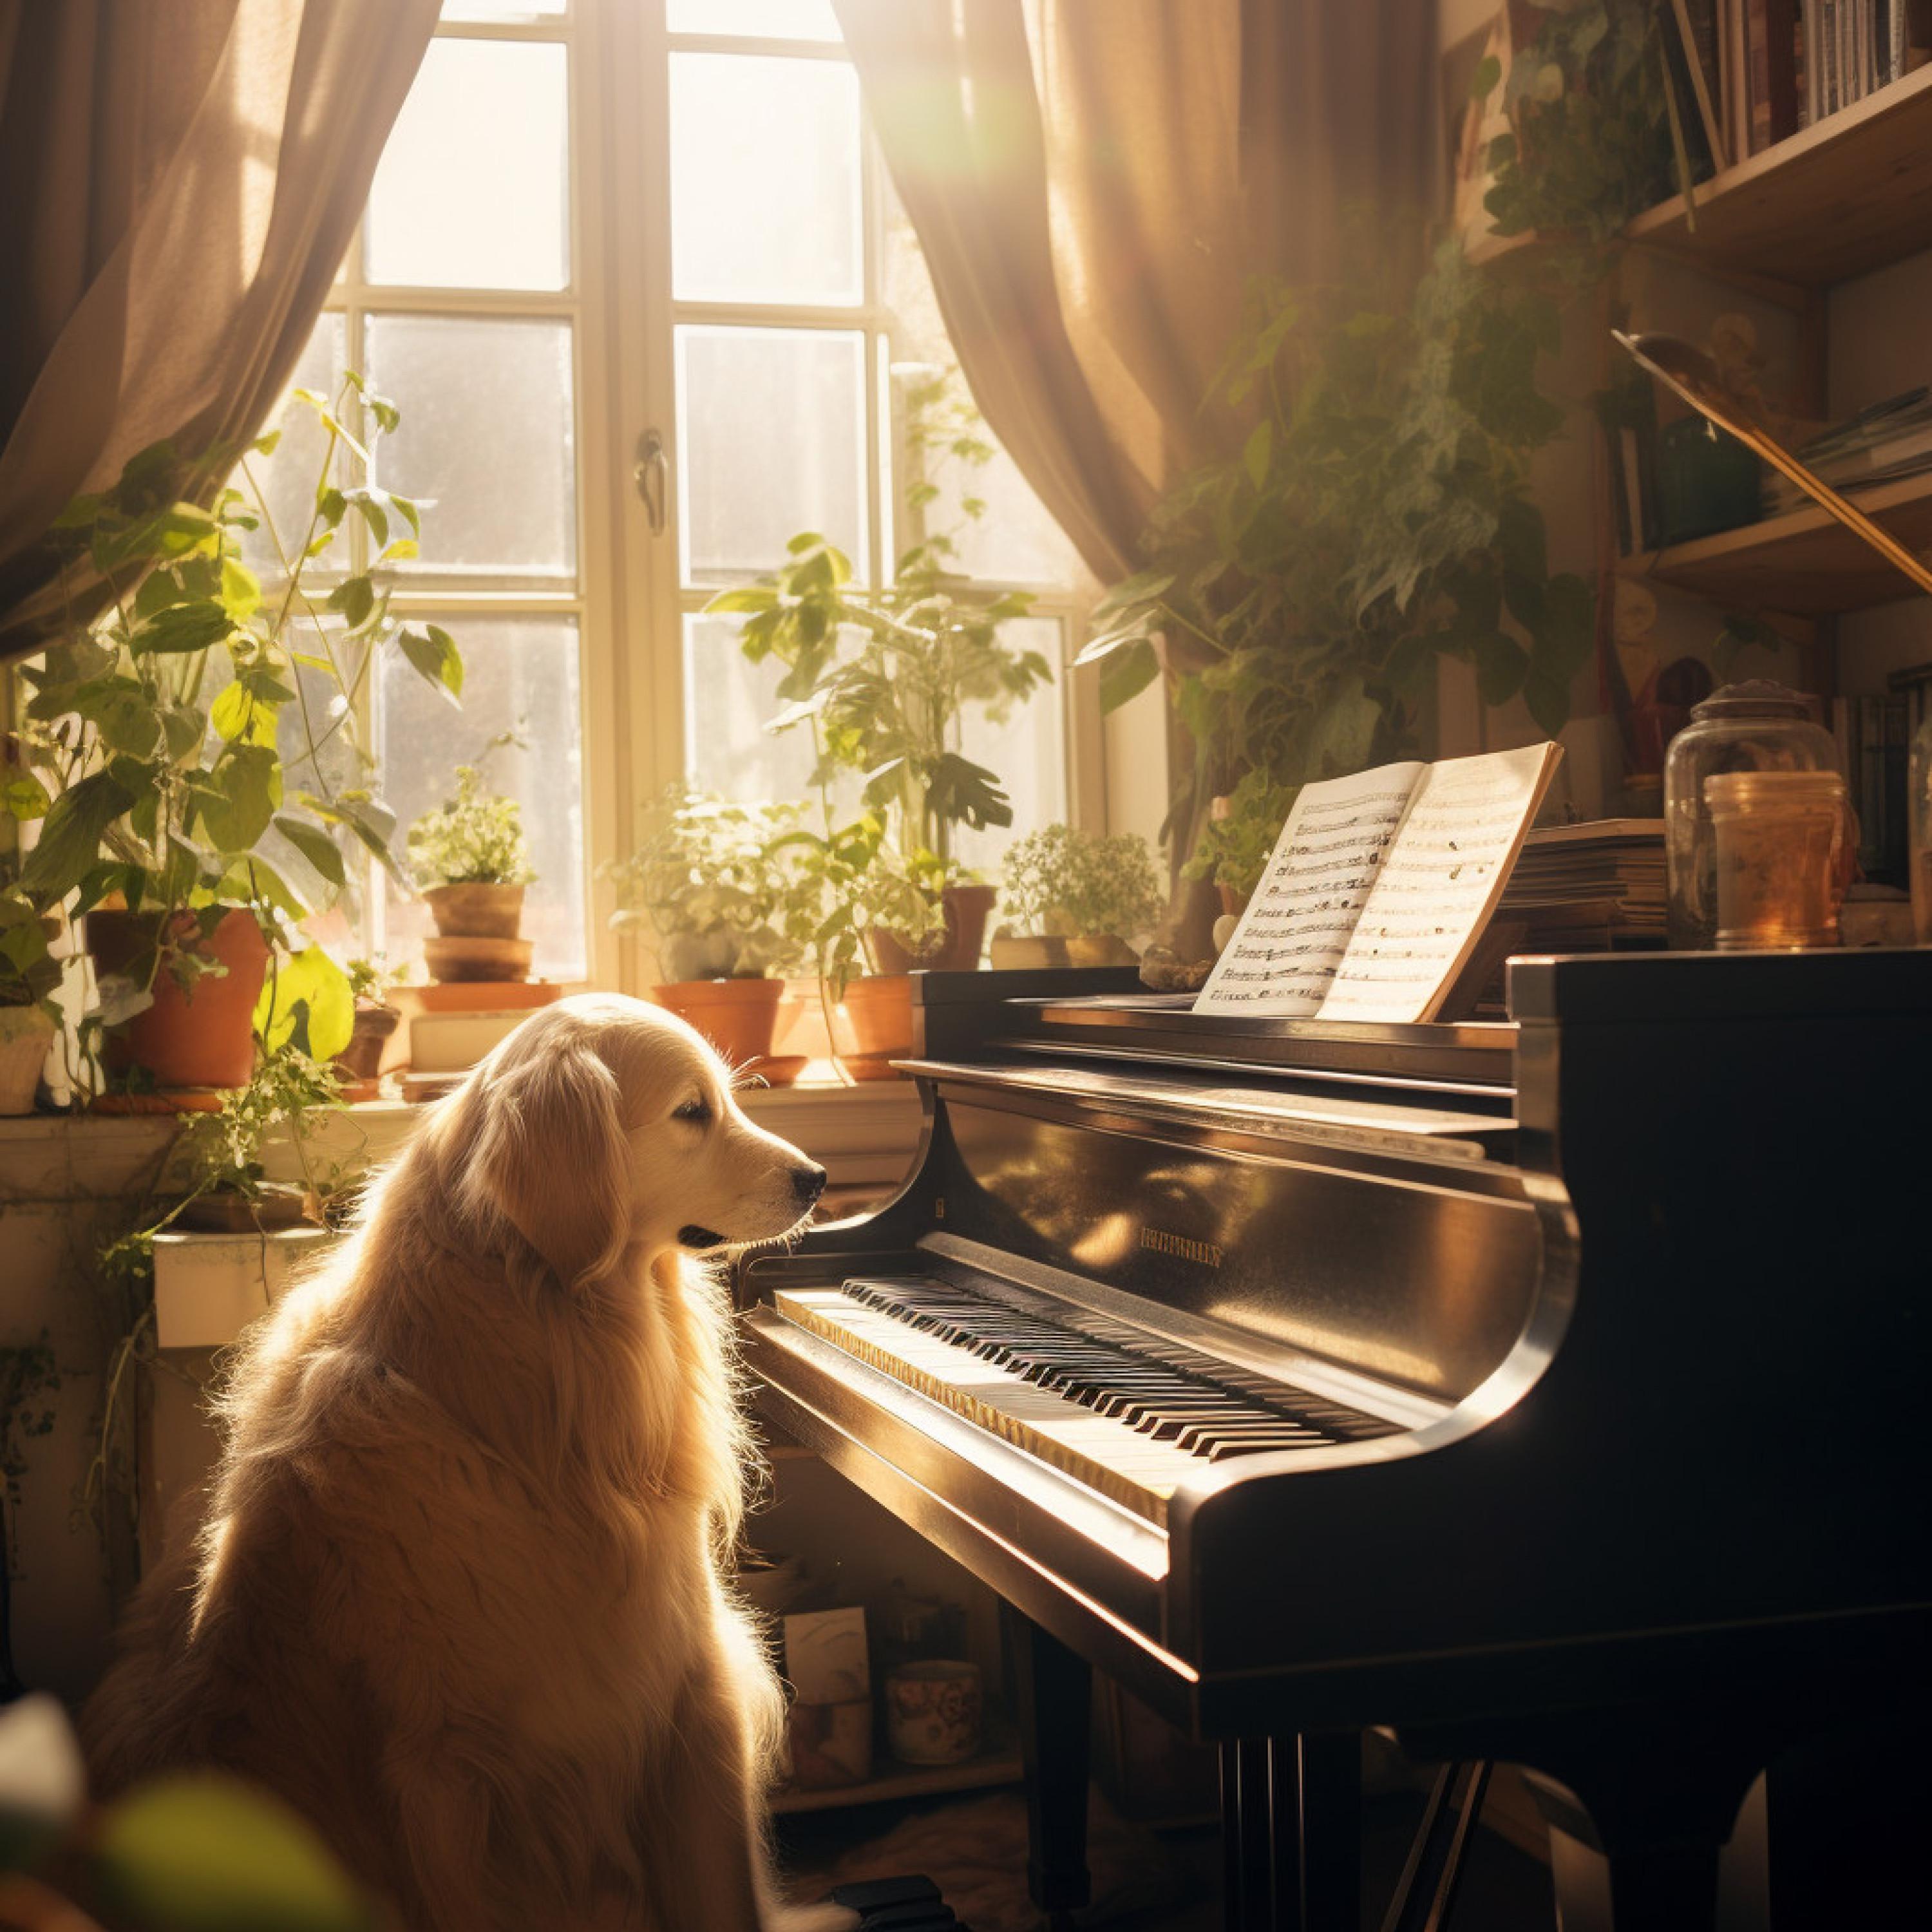 Pet Care Music Therapy - Soothing Serenade for Furry Friends